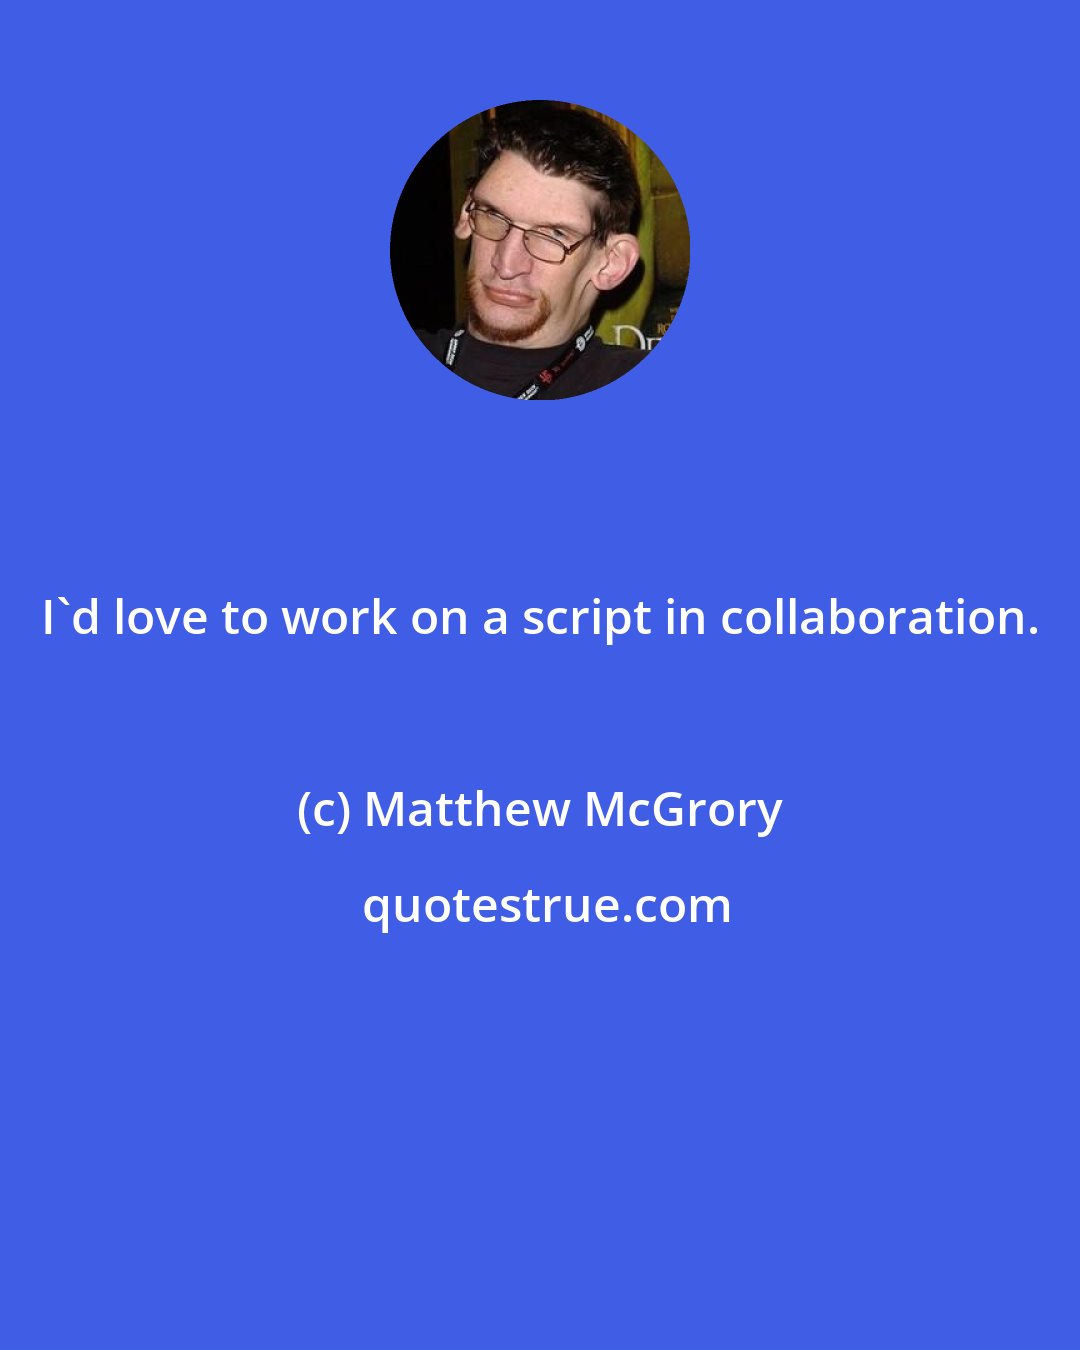 Matthew McGrory: I'd love to work on a script in collaboration.